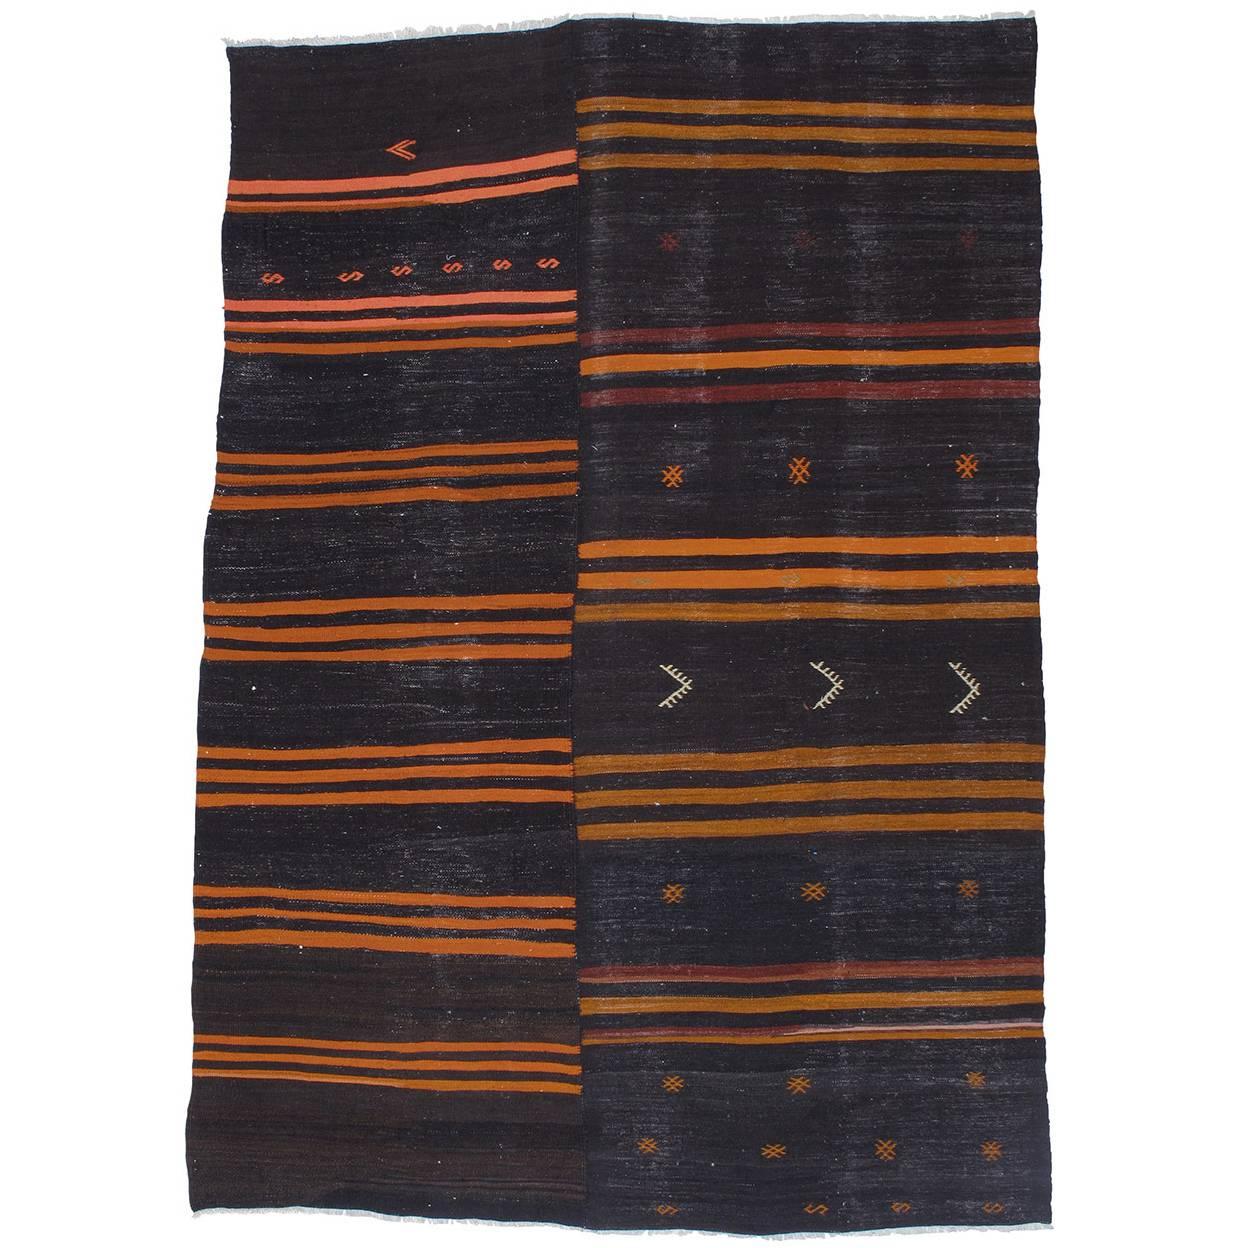 Two-Panel Kilim with Stripes Rug